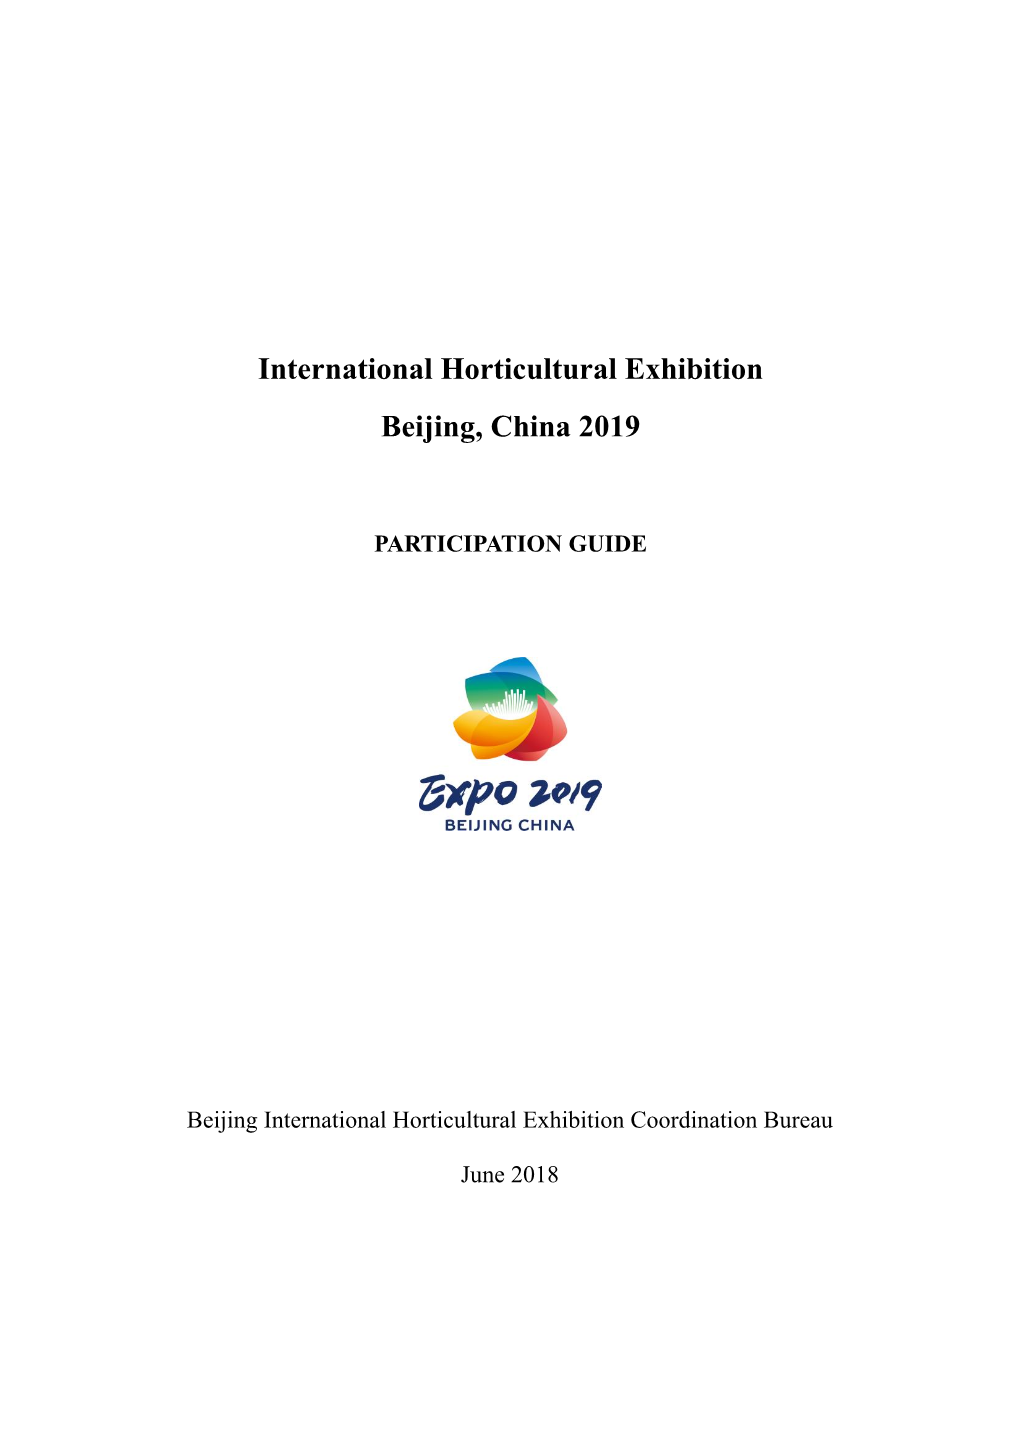 International Horticultural Exhibition Beijing, China 2019